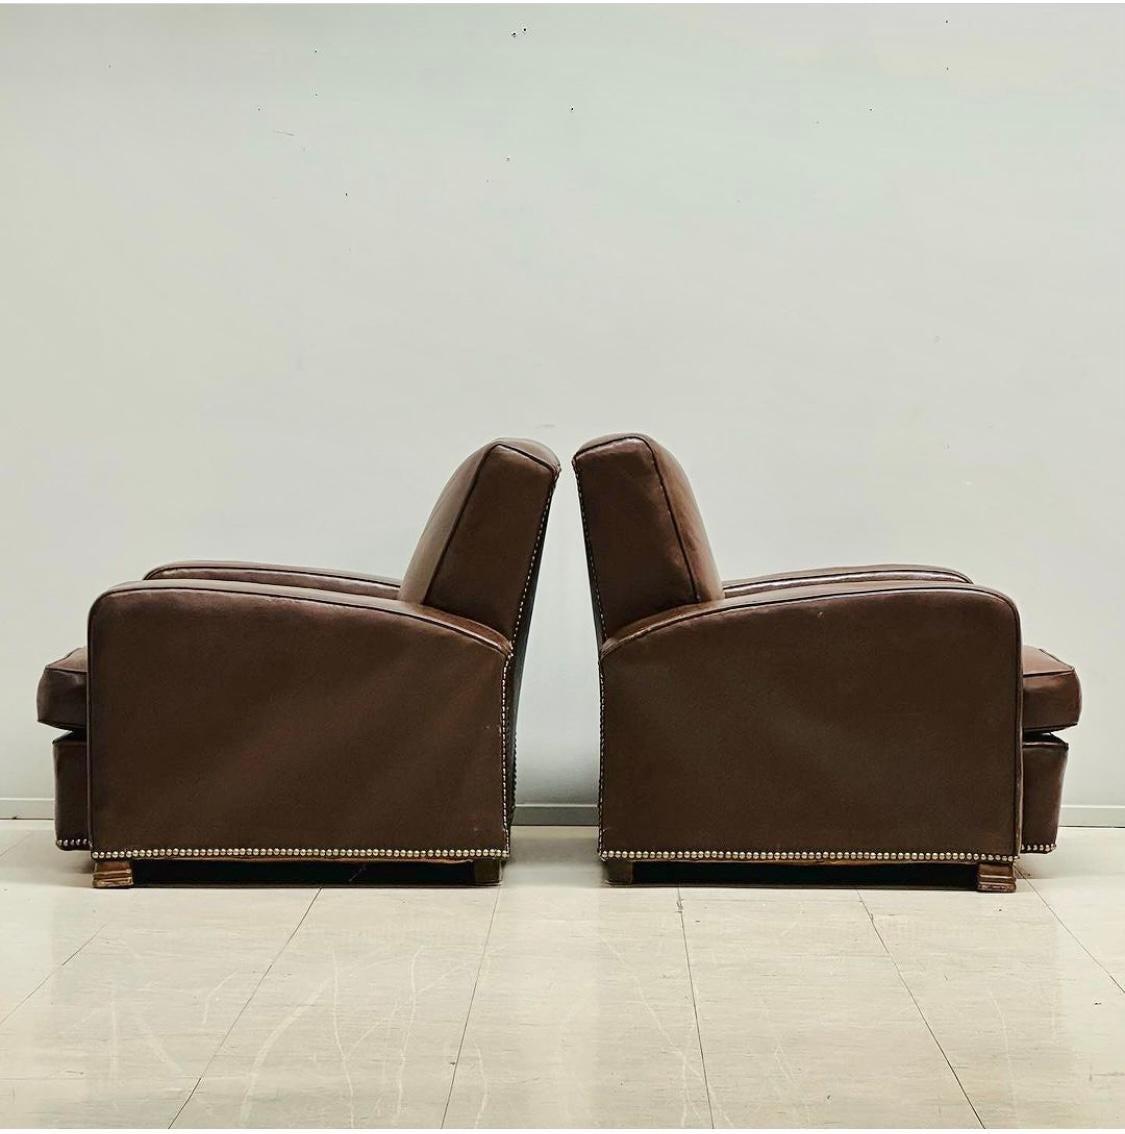 French Pair Modernist , Art Deco Leather Club Chairs by Jacques Adnet 1940s For Sale